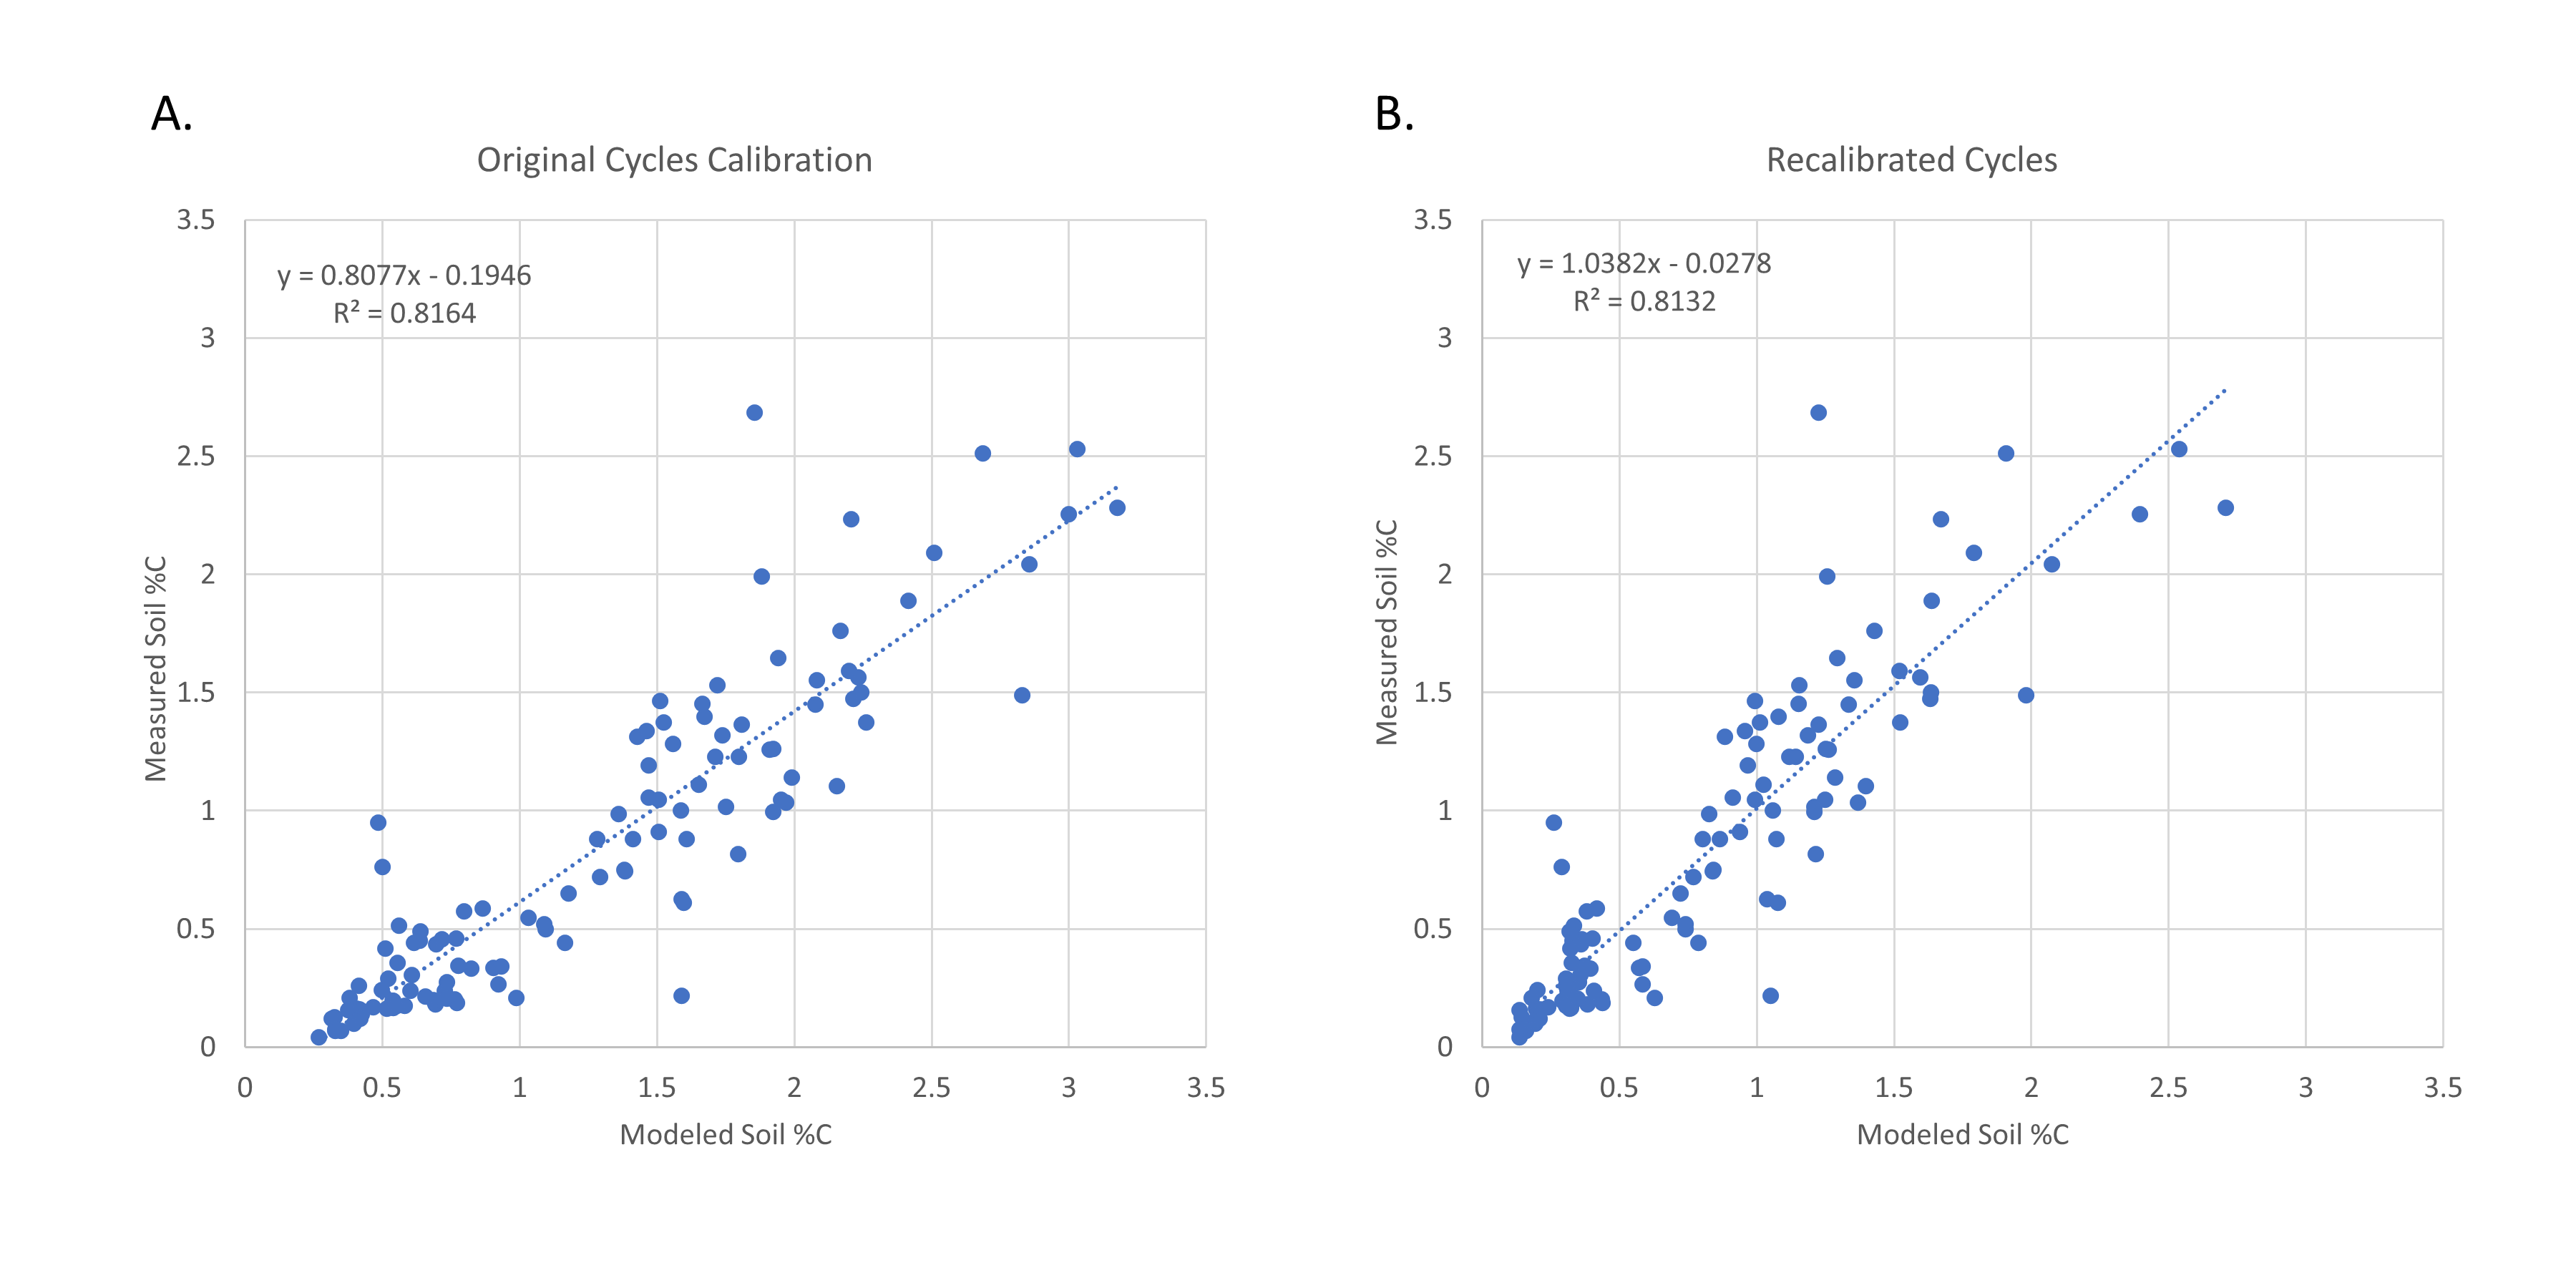 Relationship between modeled and observed soil C concentrations before and after recalibration of the Cycles model.